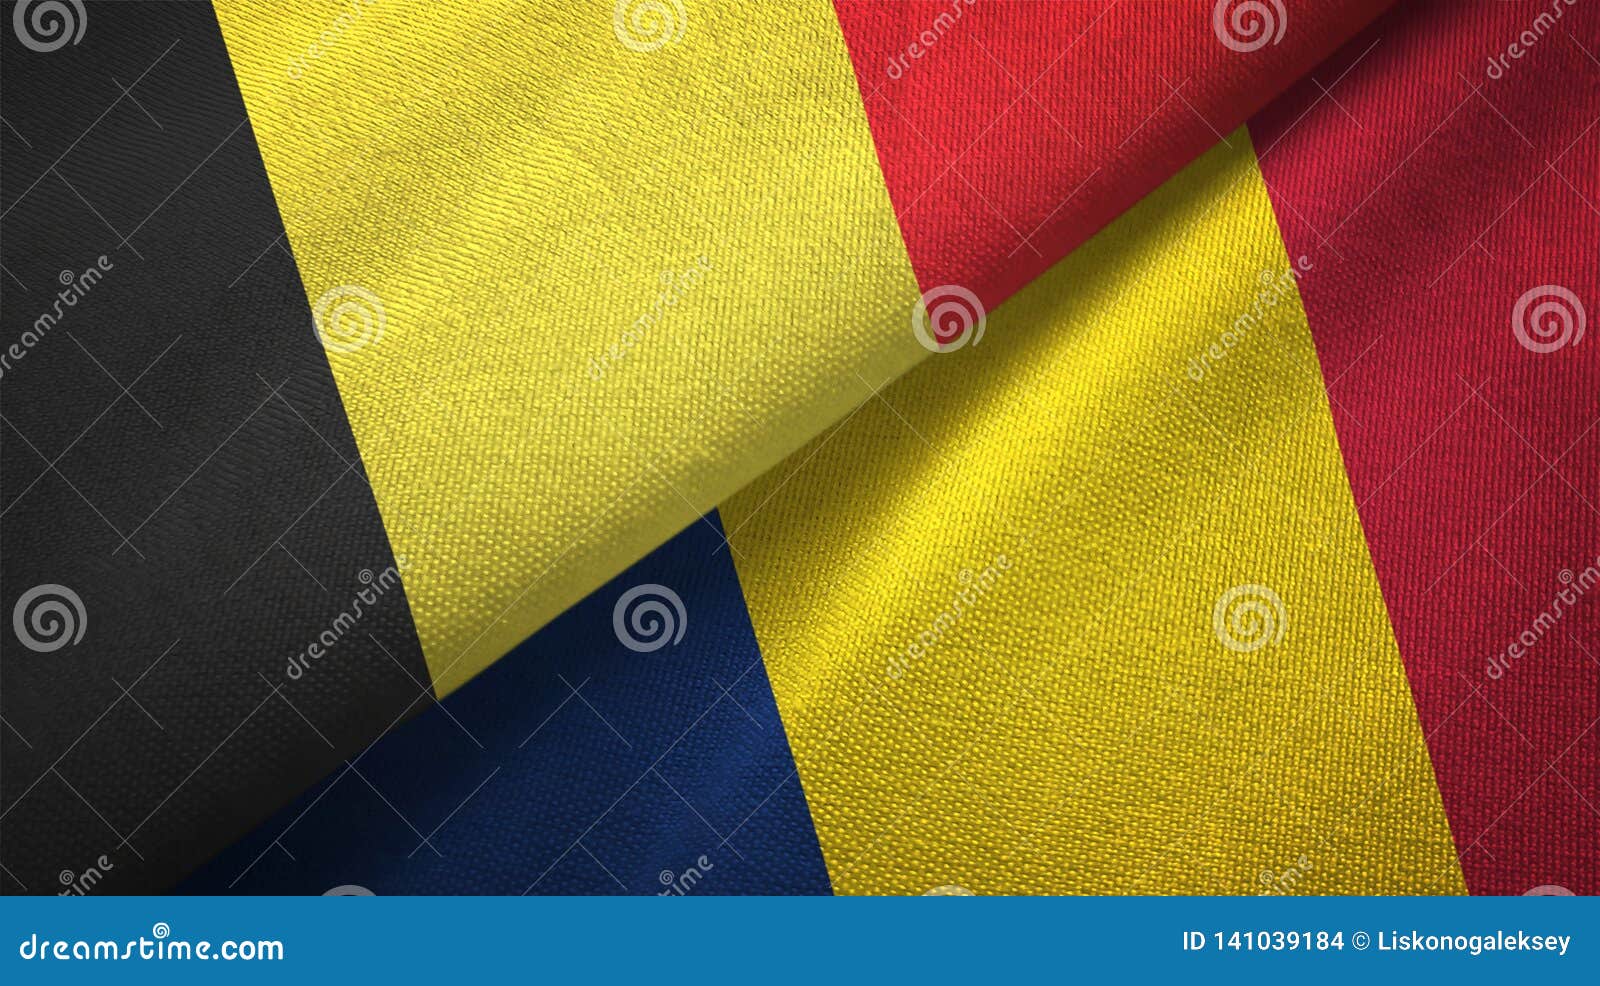 Belgium and Chad Two Flags Textile Cloth, Fabric Texture Stock ...